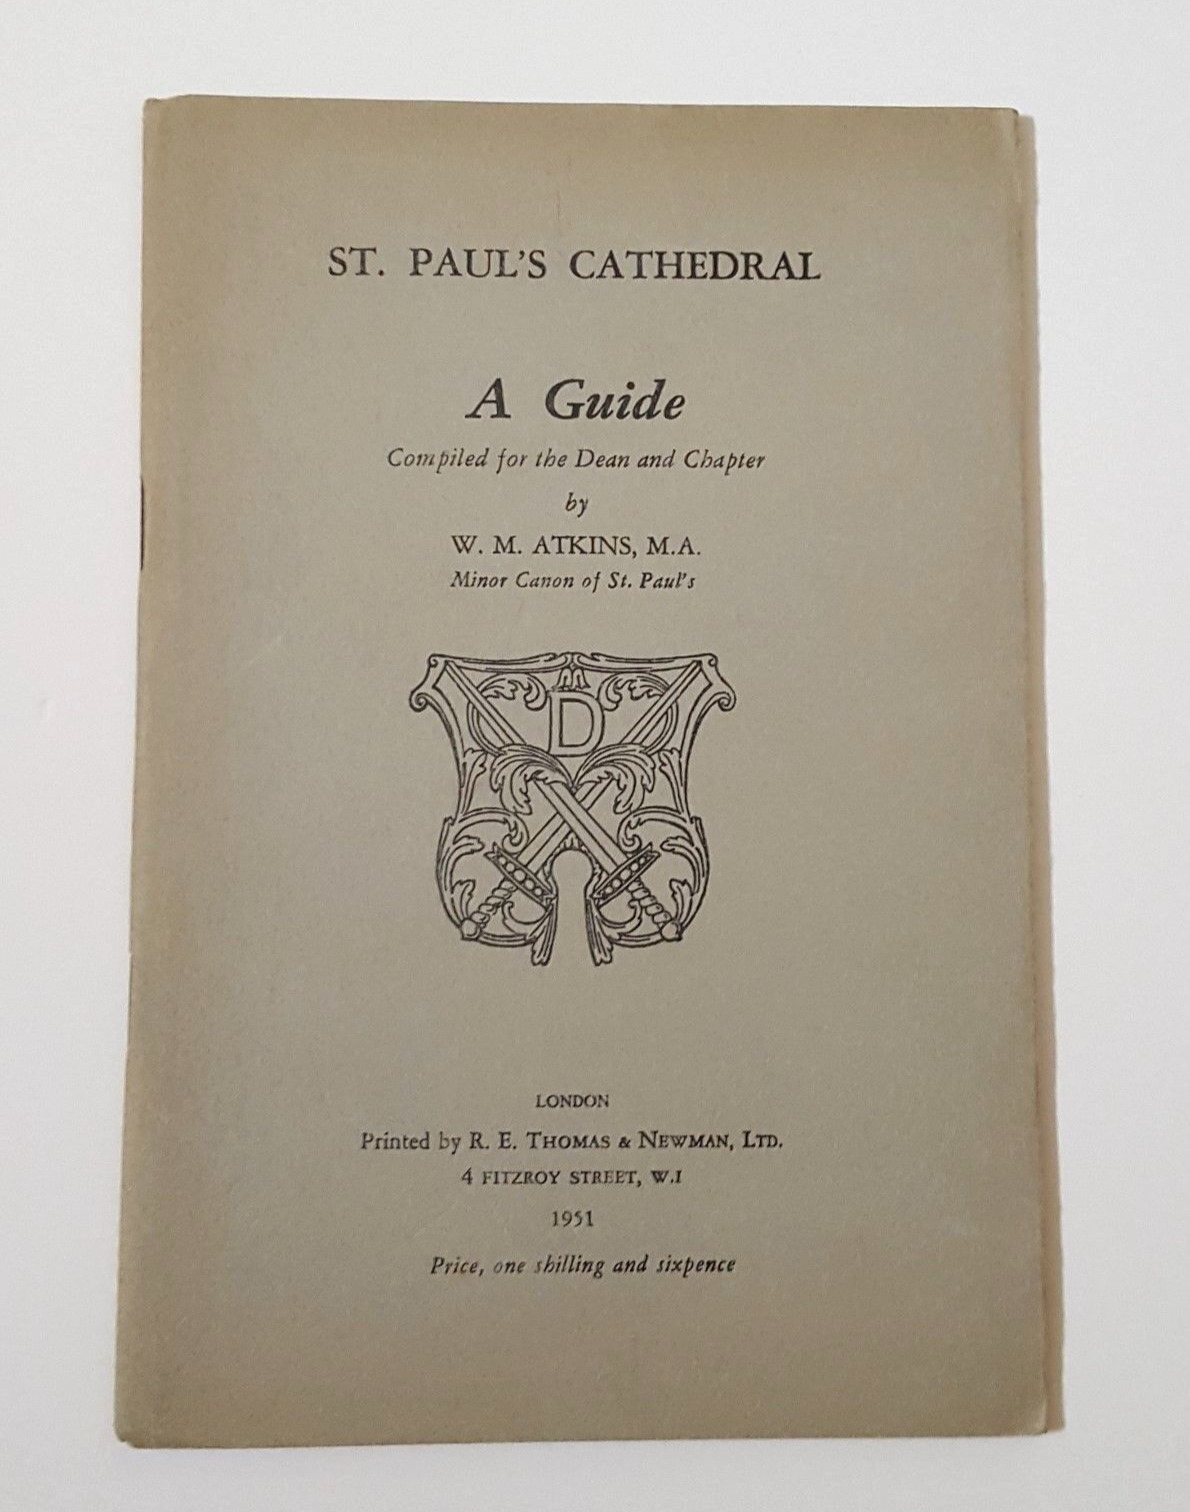 St. Paul's Cathedral Guide Compiled by W. M. Atkins    1951 Vintage Tour Booklet